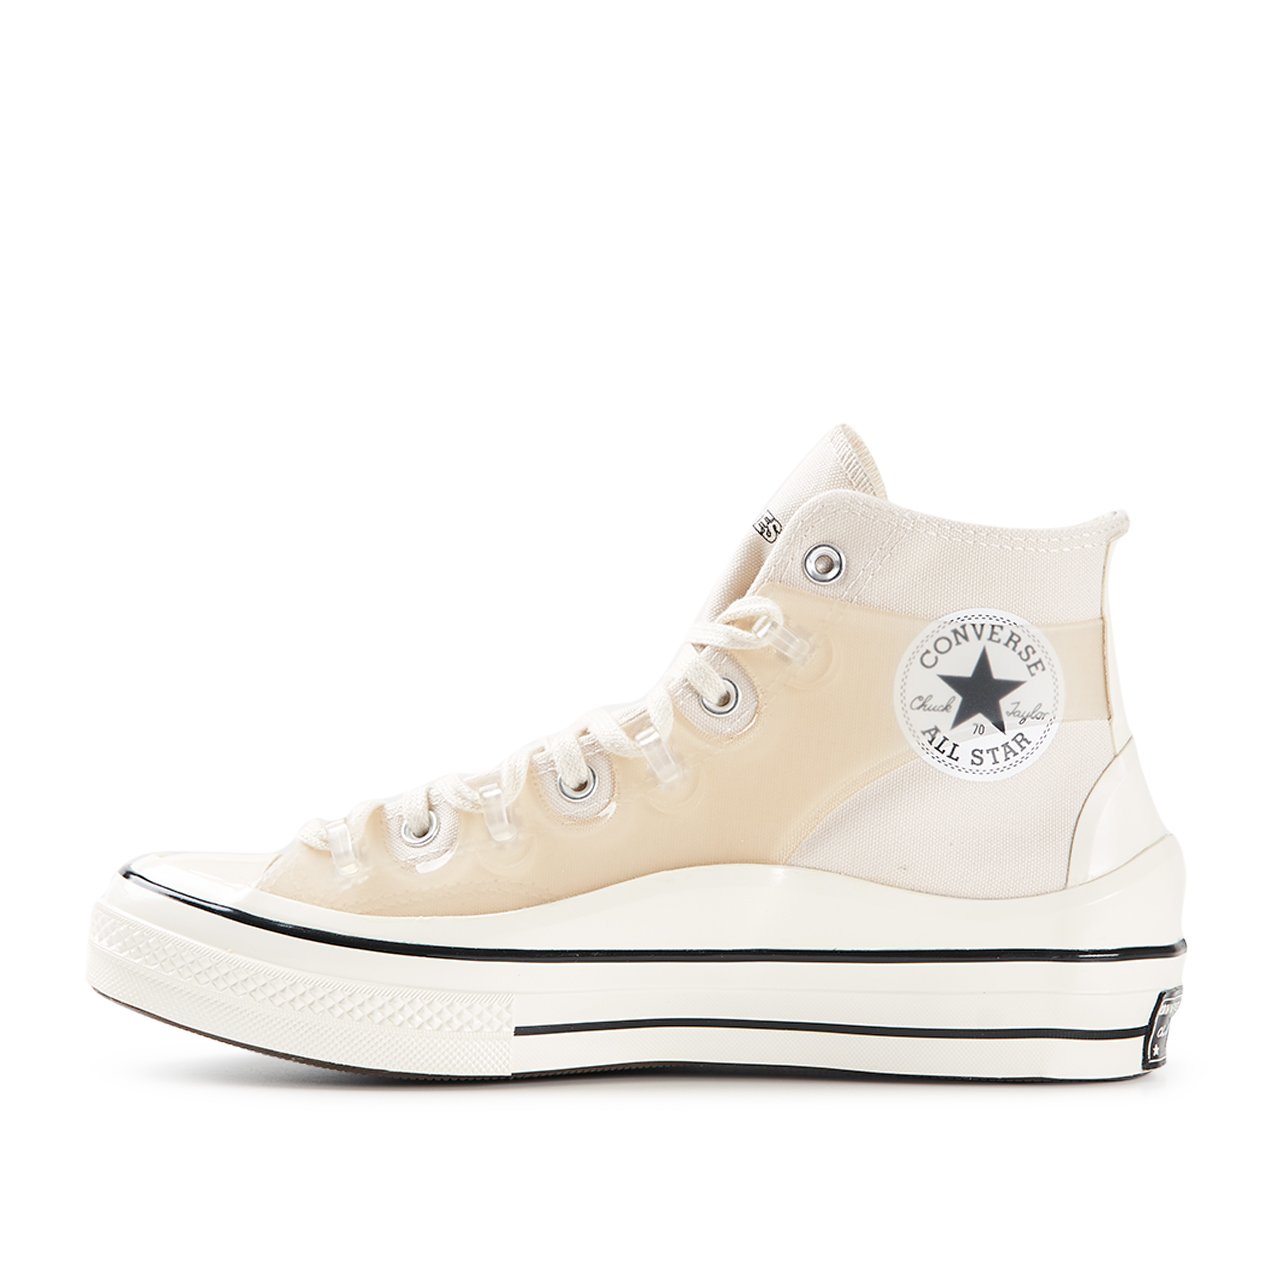 How to Cop the Kim Jones x Converse Chuck 70 Natural Ivory •